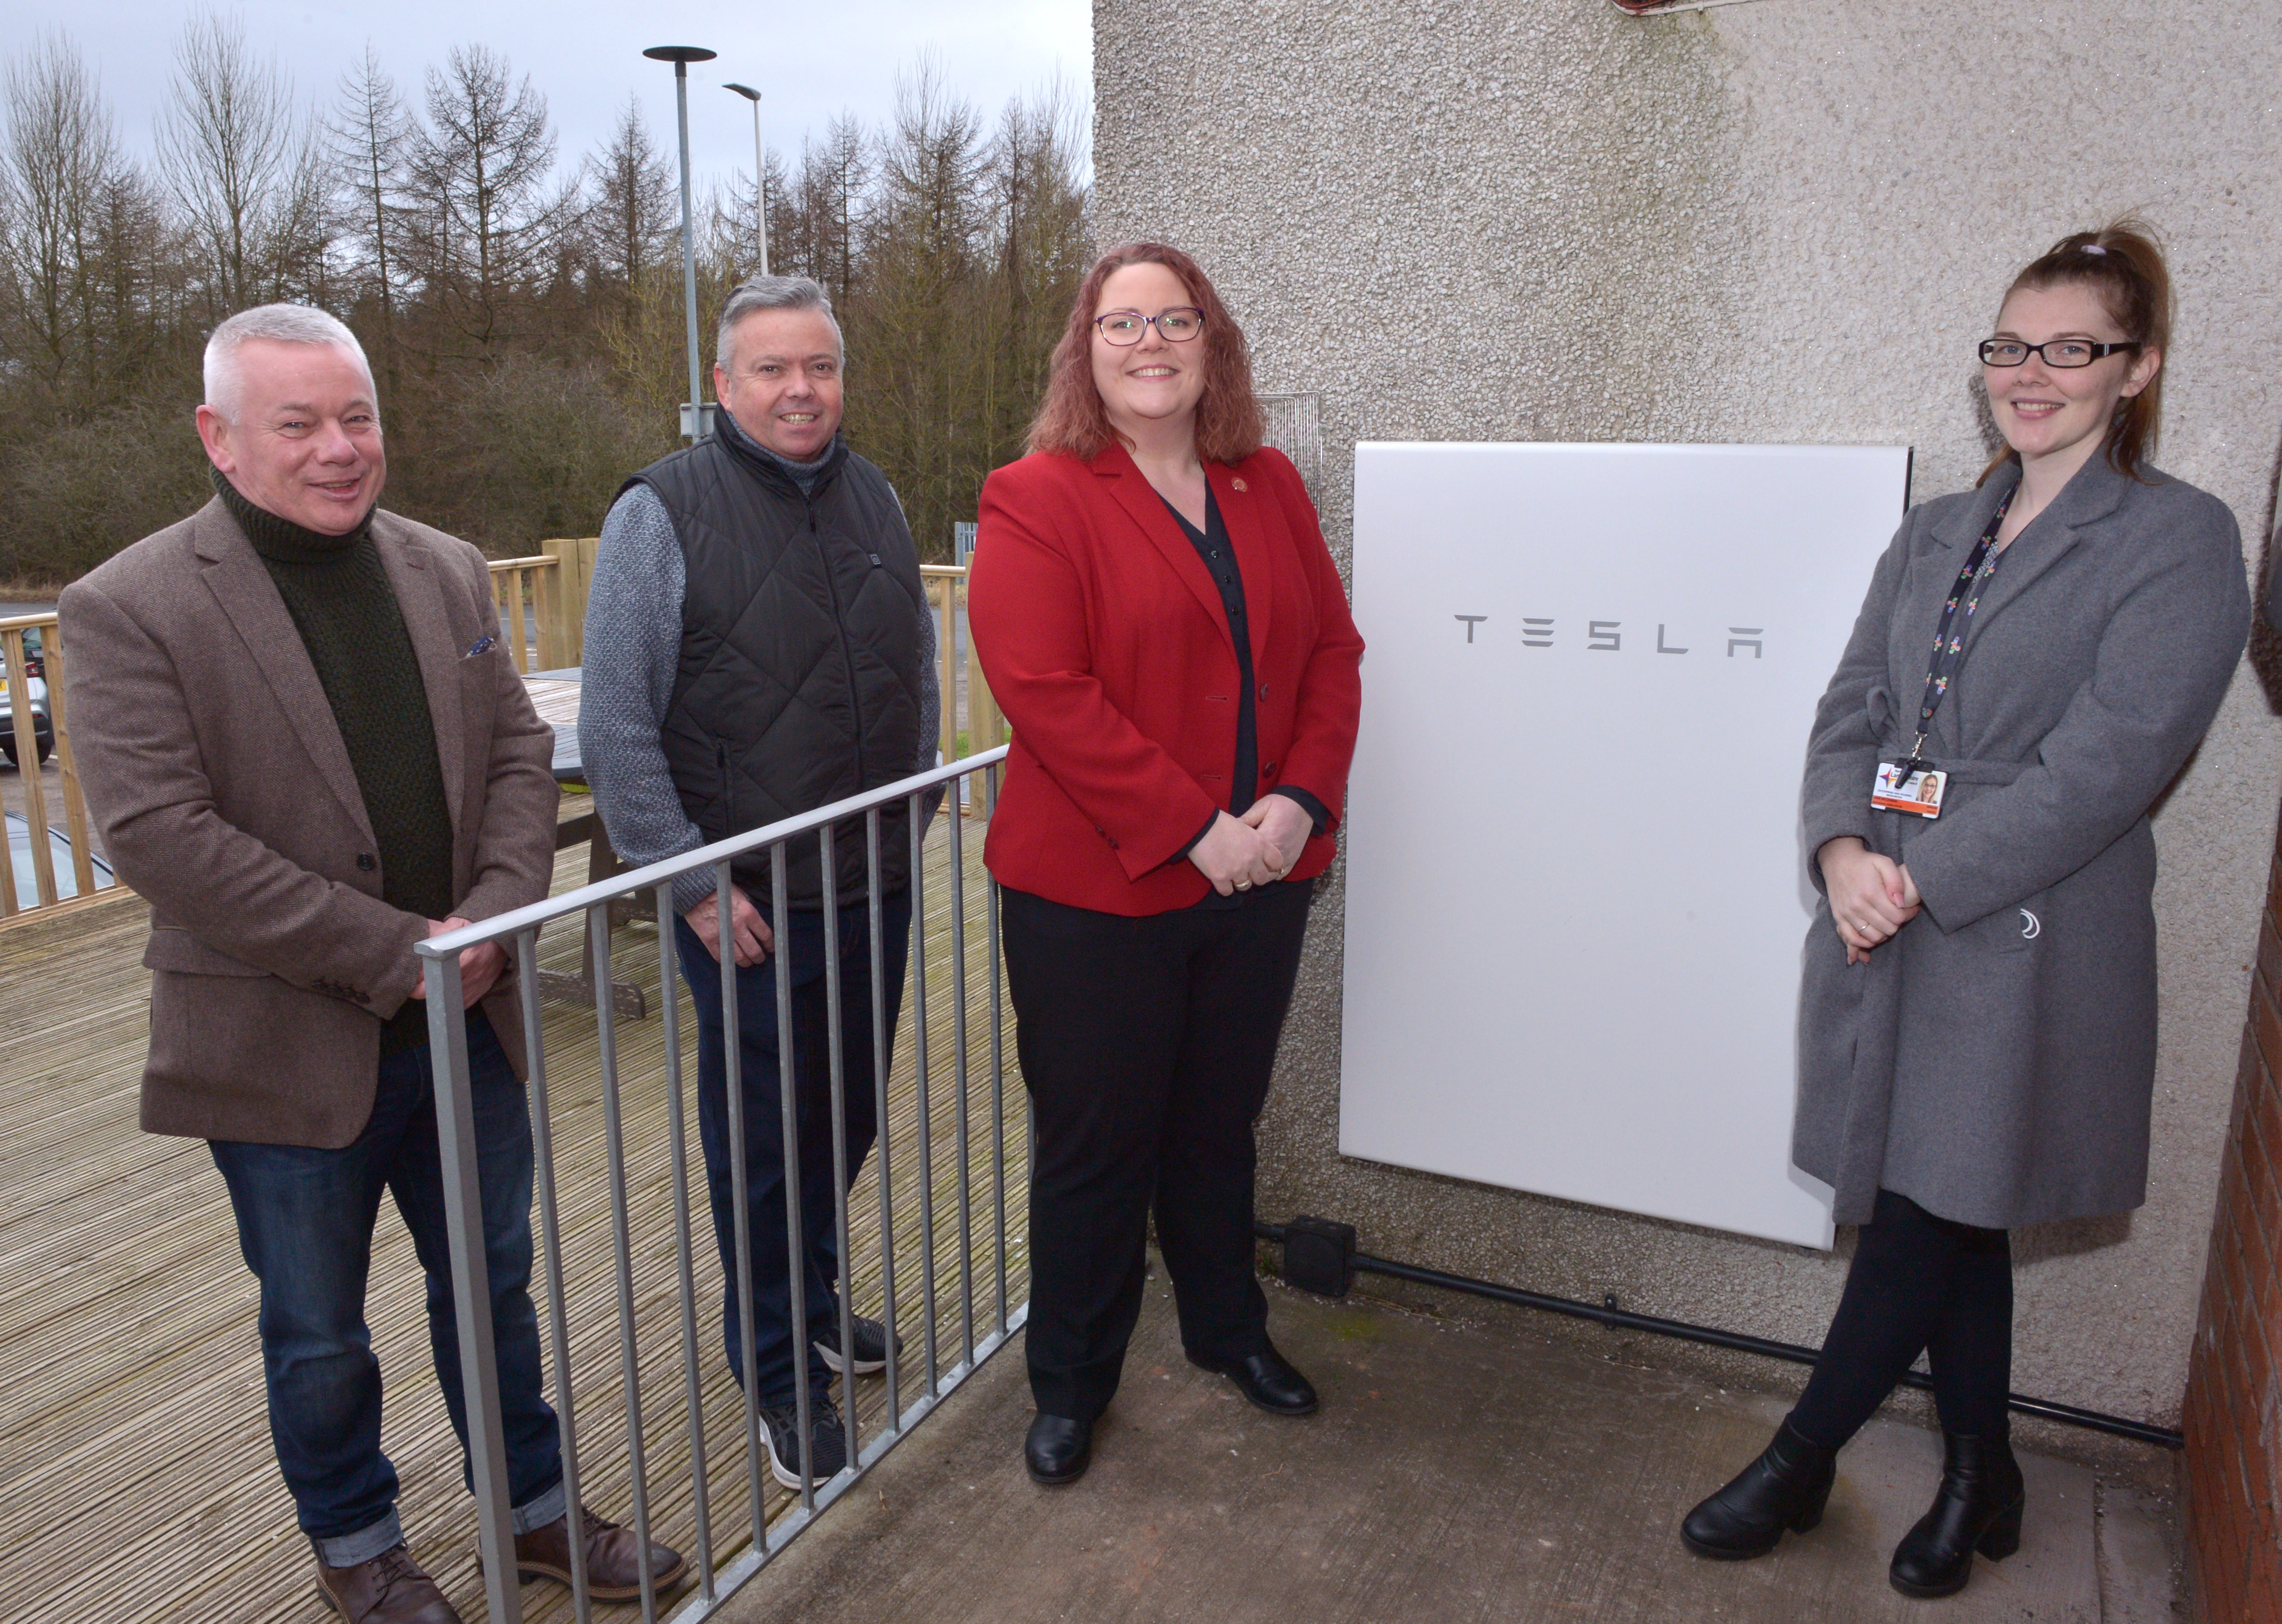 North Lanarkshire Council invests in renewable heating systems